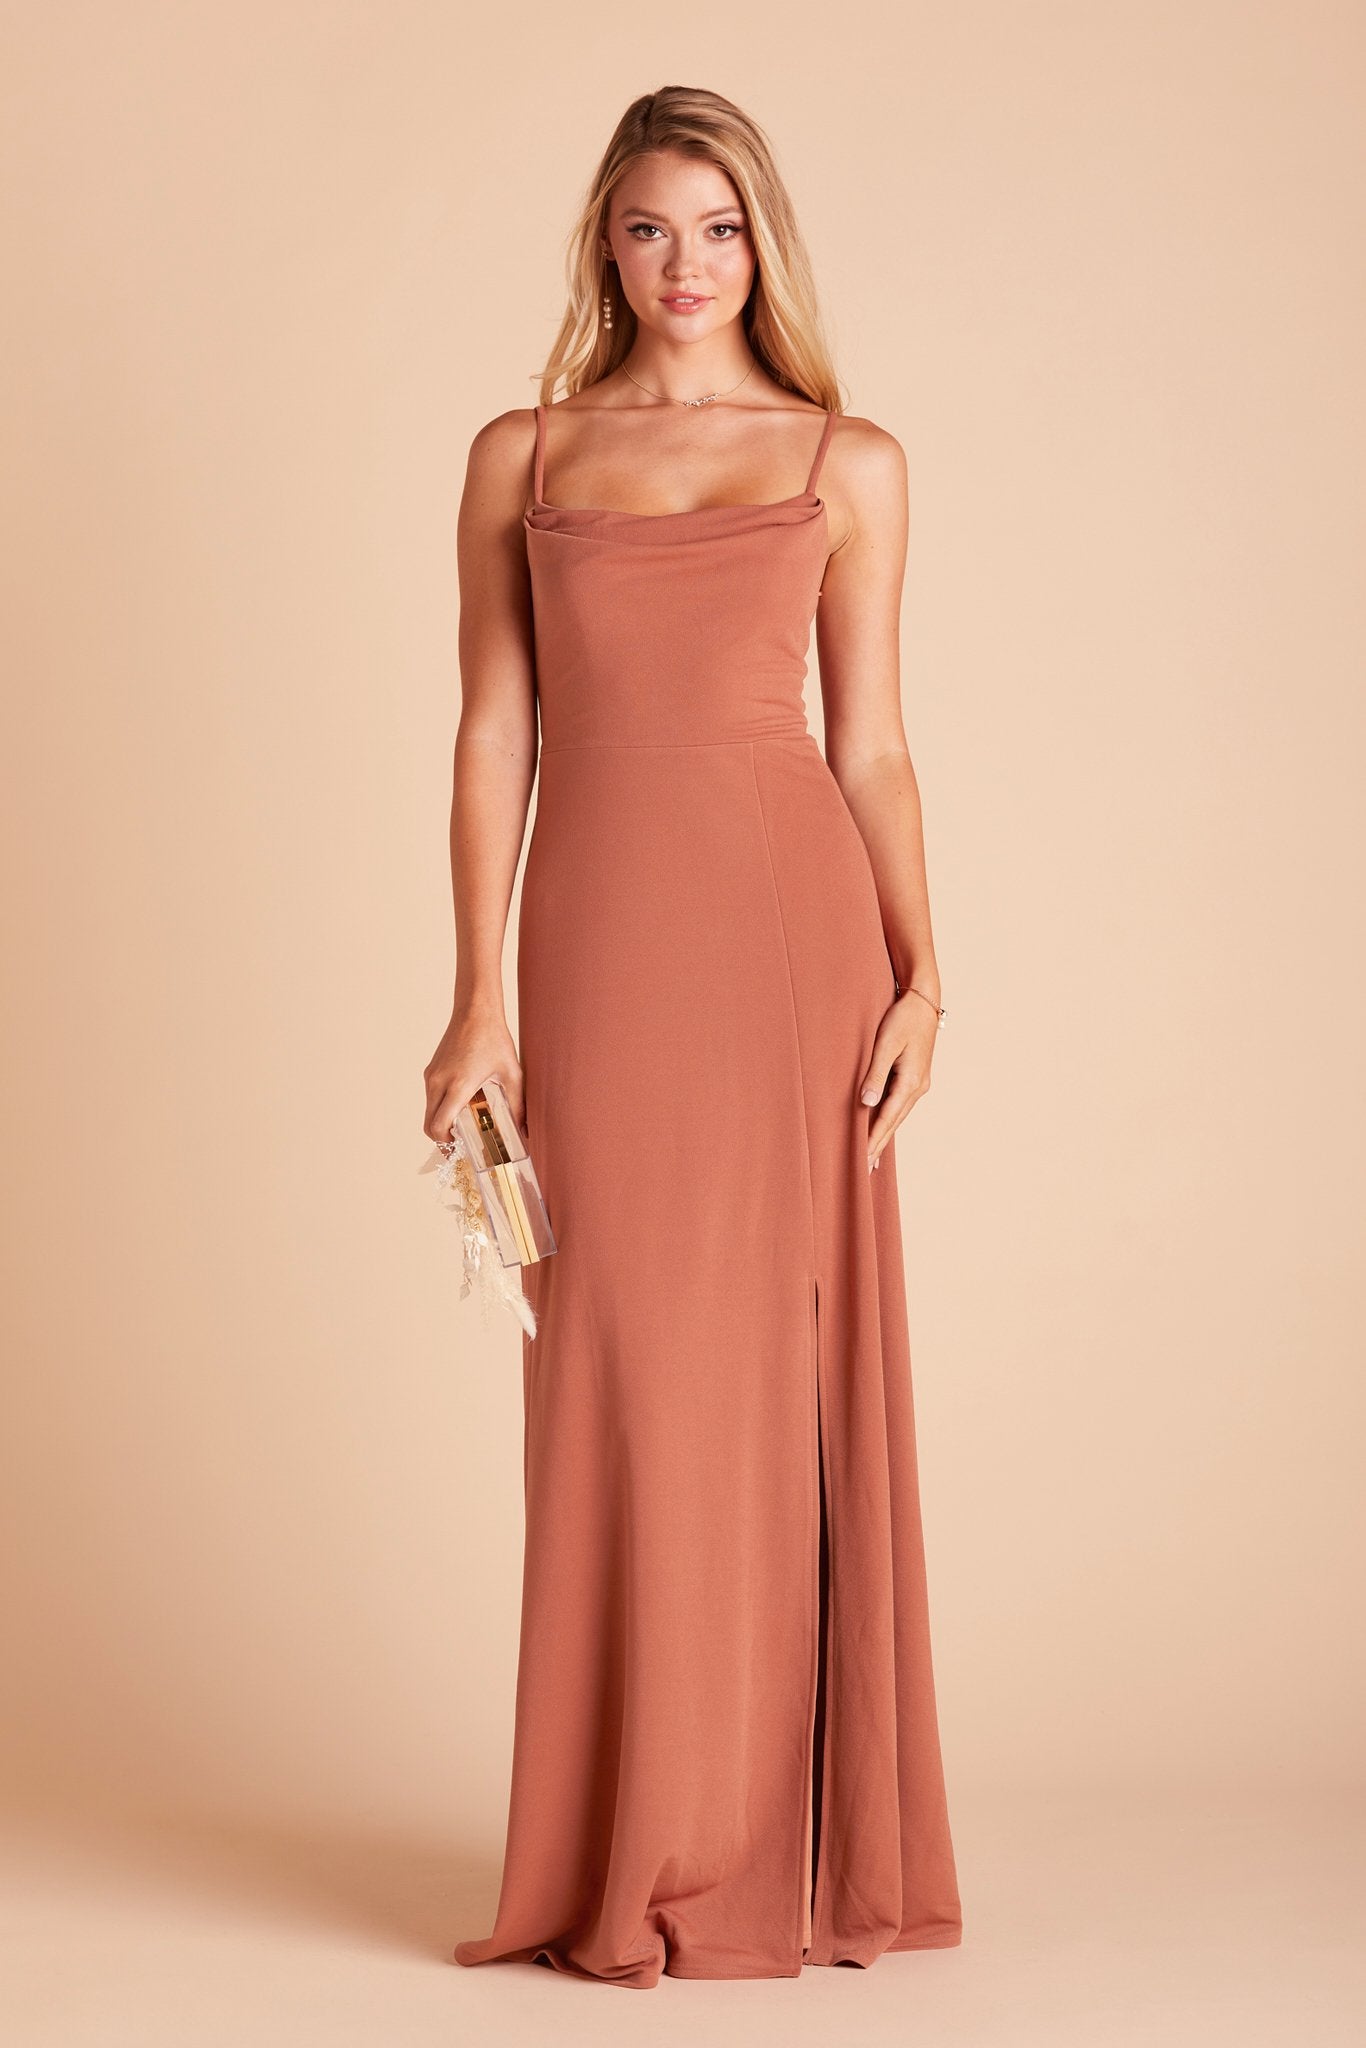 Ash Cowl Neck Bridesmaid Dress with ...